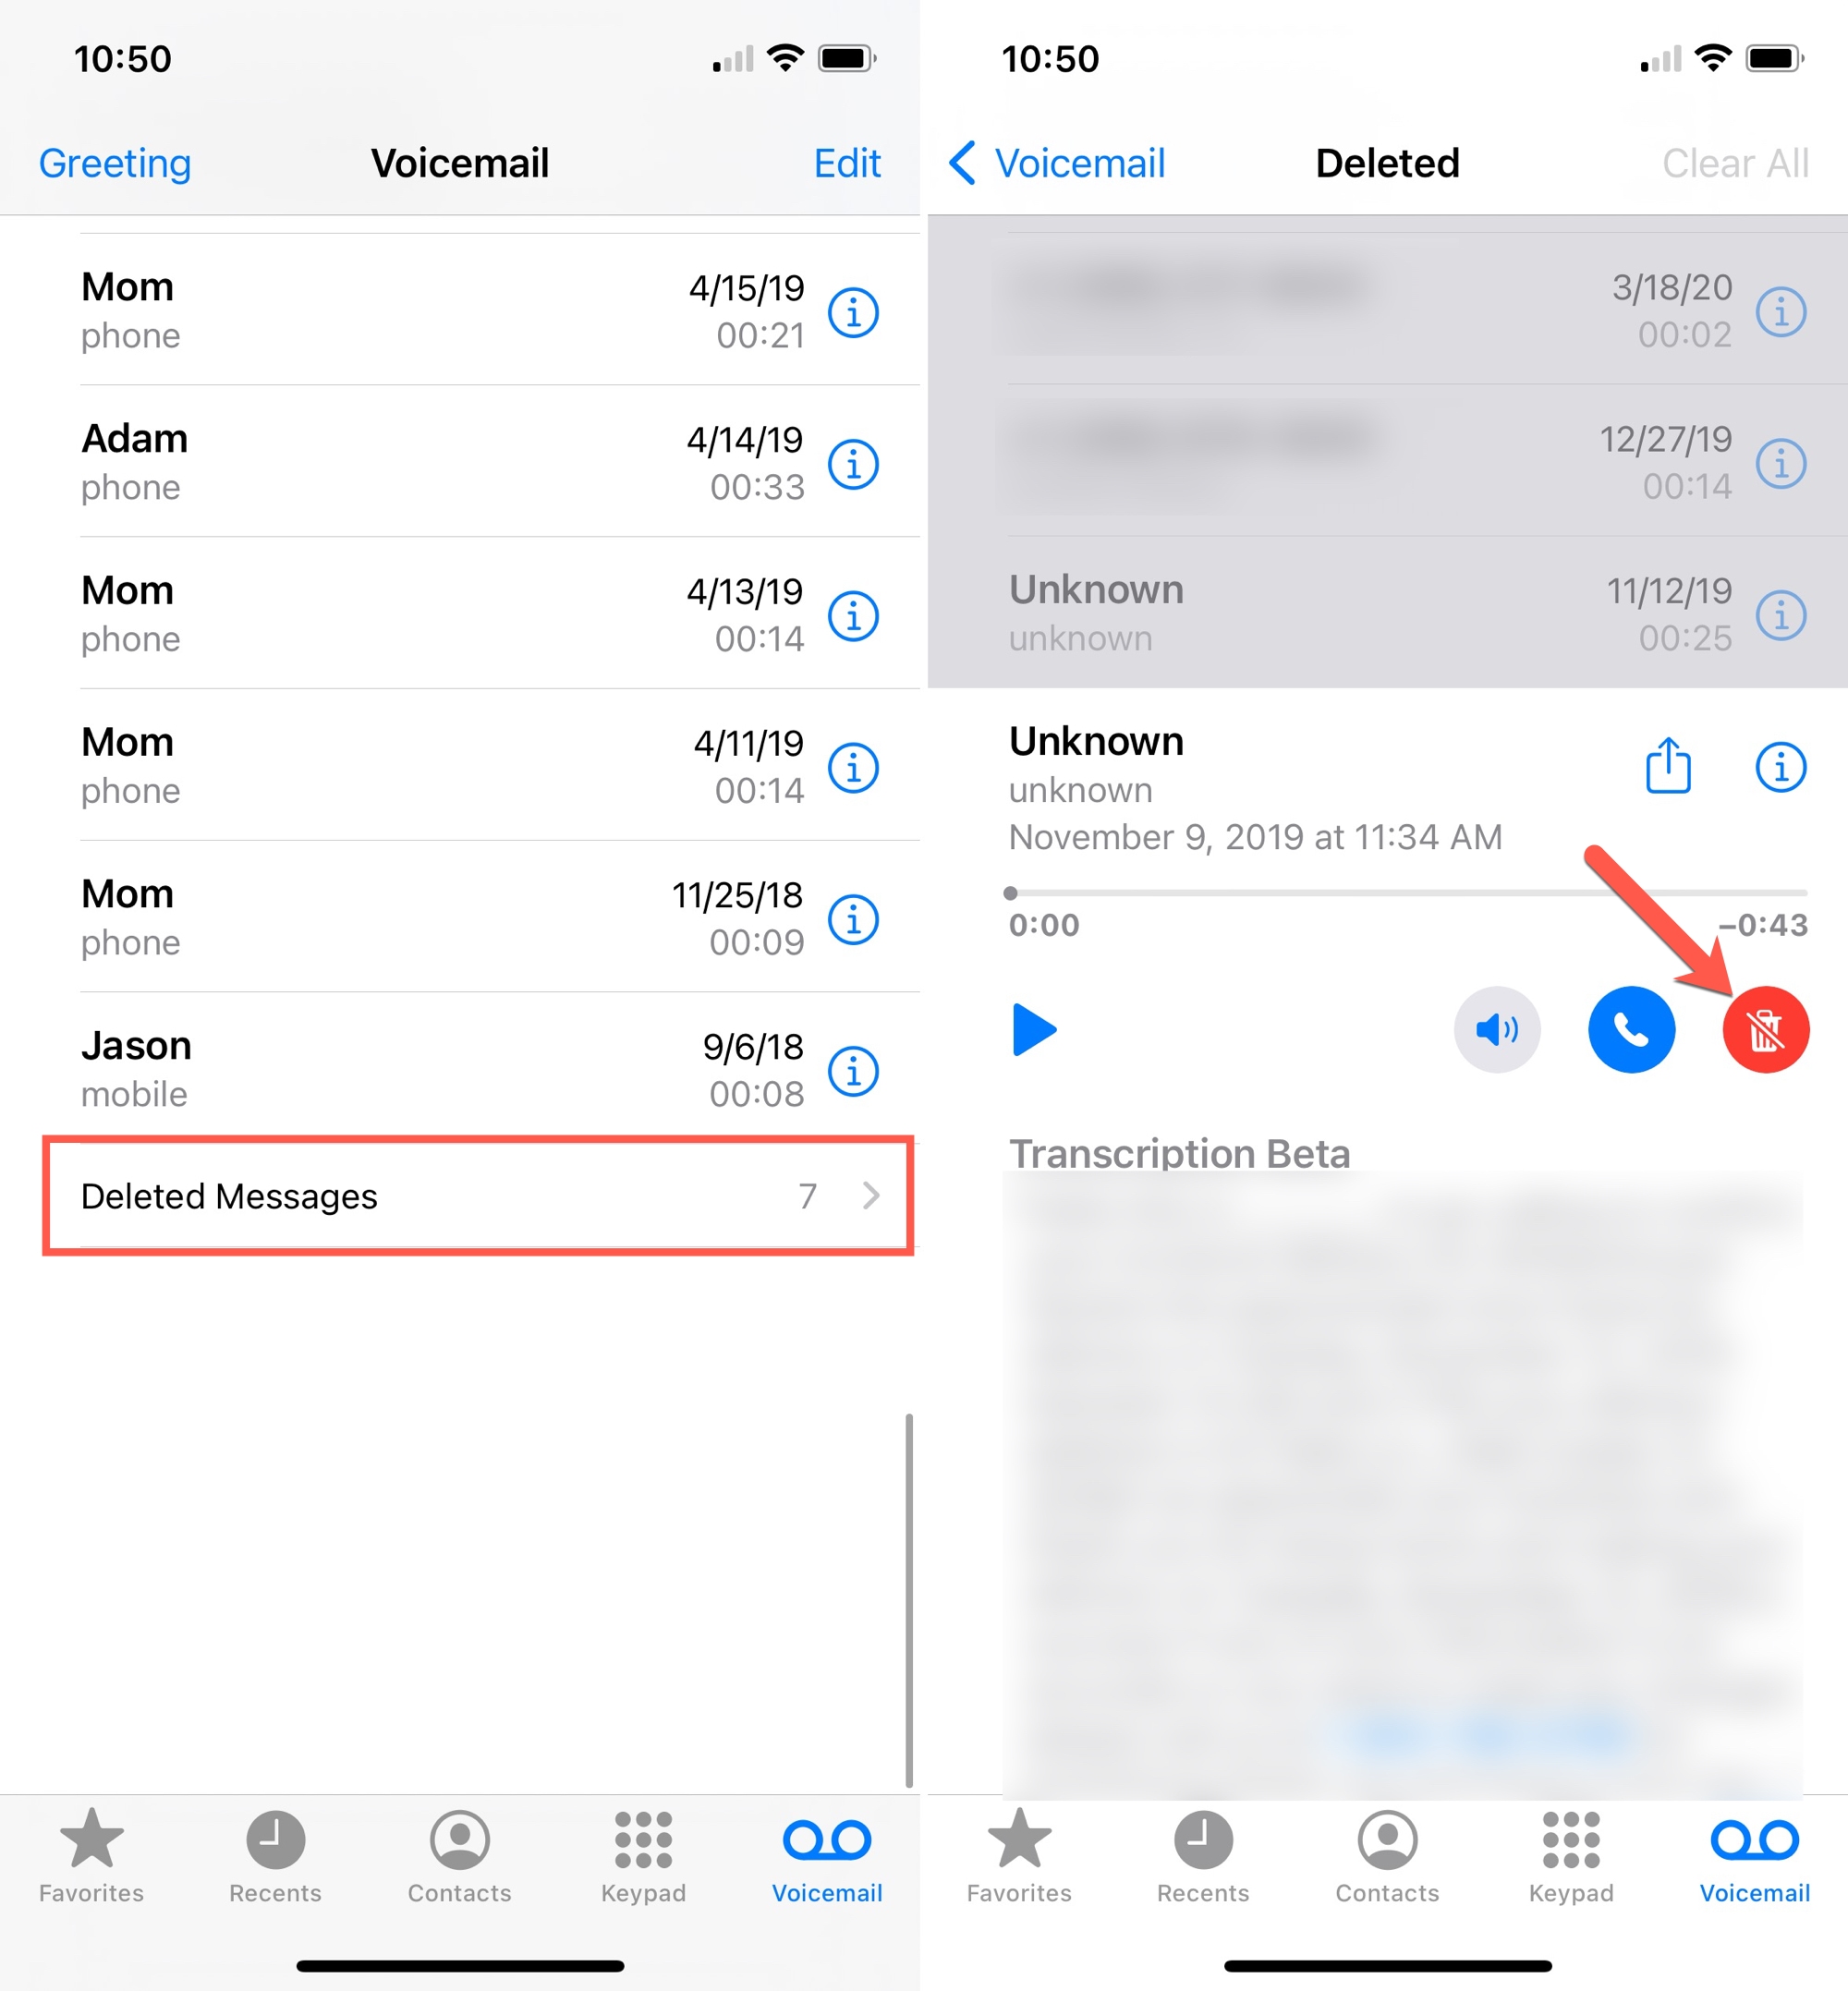 How to undelete Voicemail messages on your iPhone